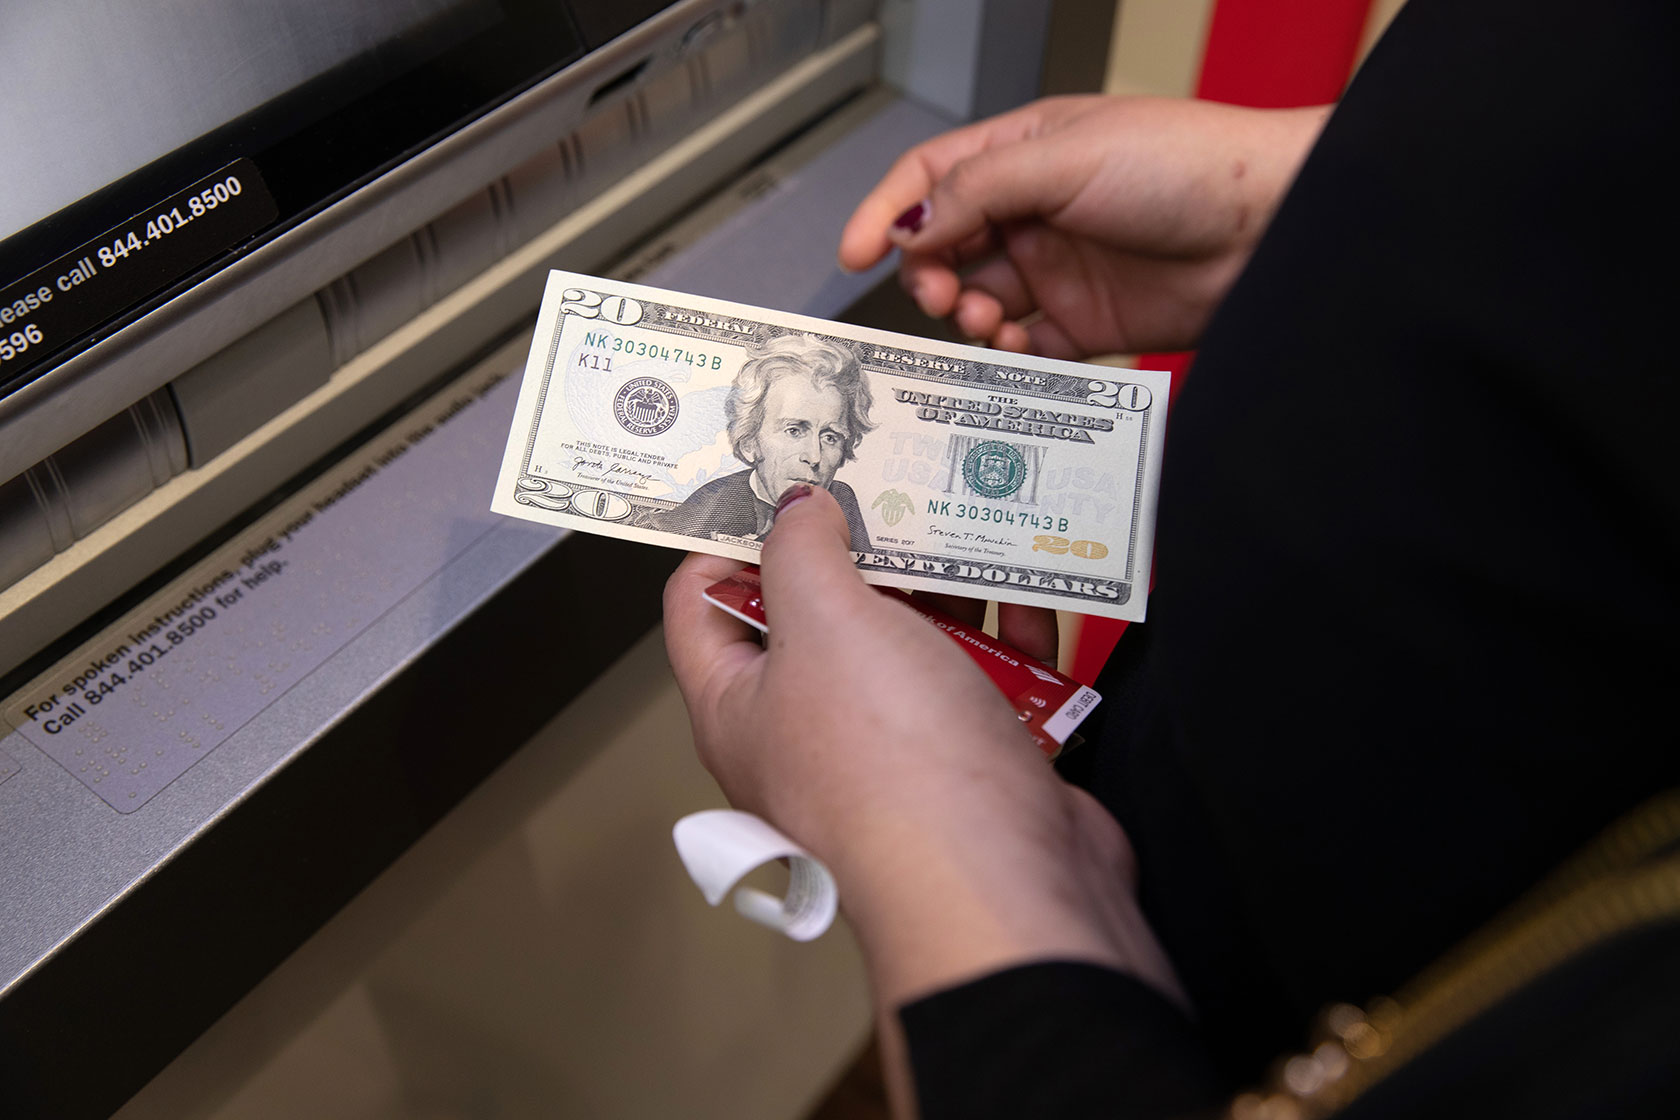 Photo shows a closeup of a person's hands in front of an ATM. In one hand, the person holds a $20 bill